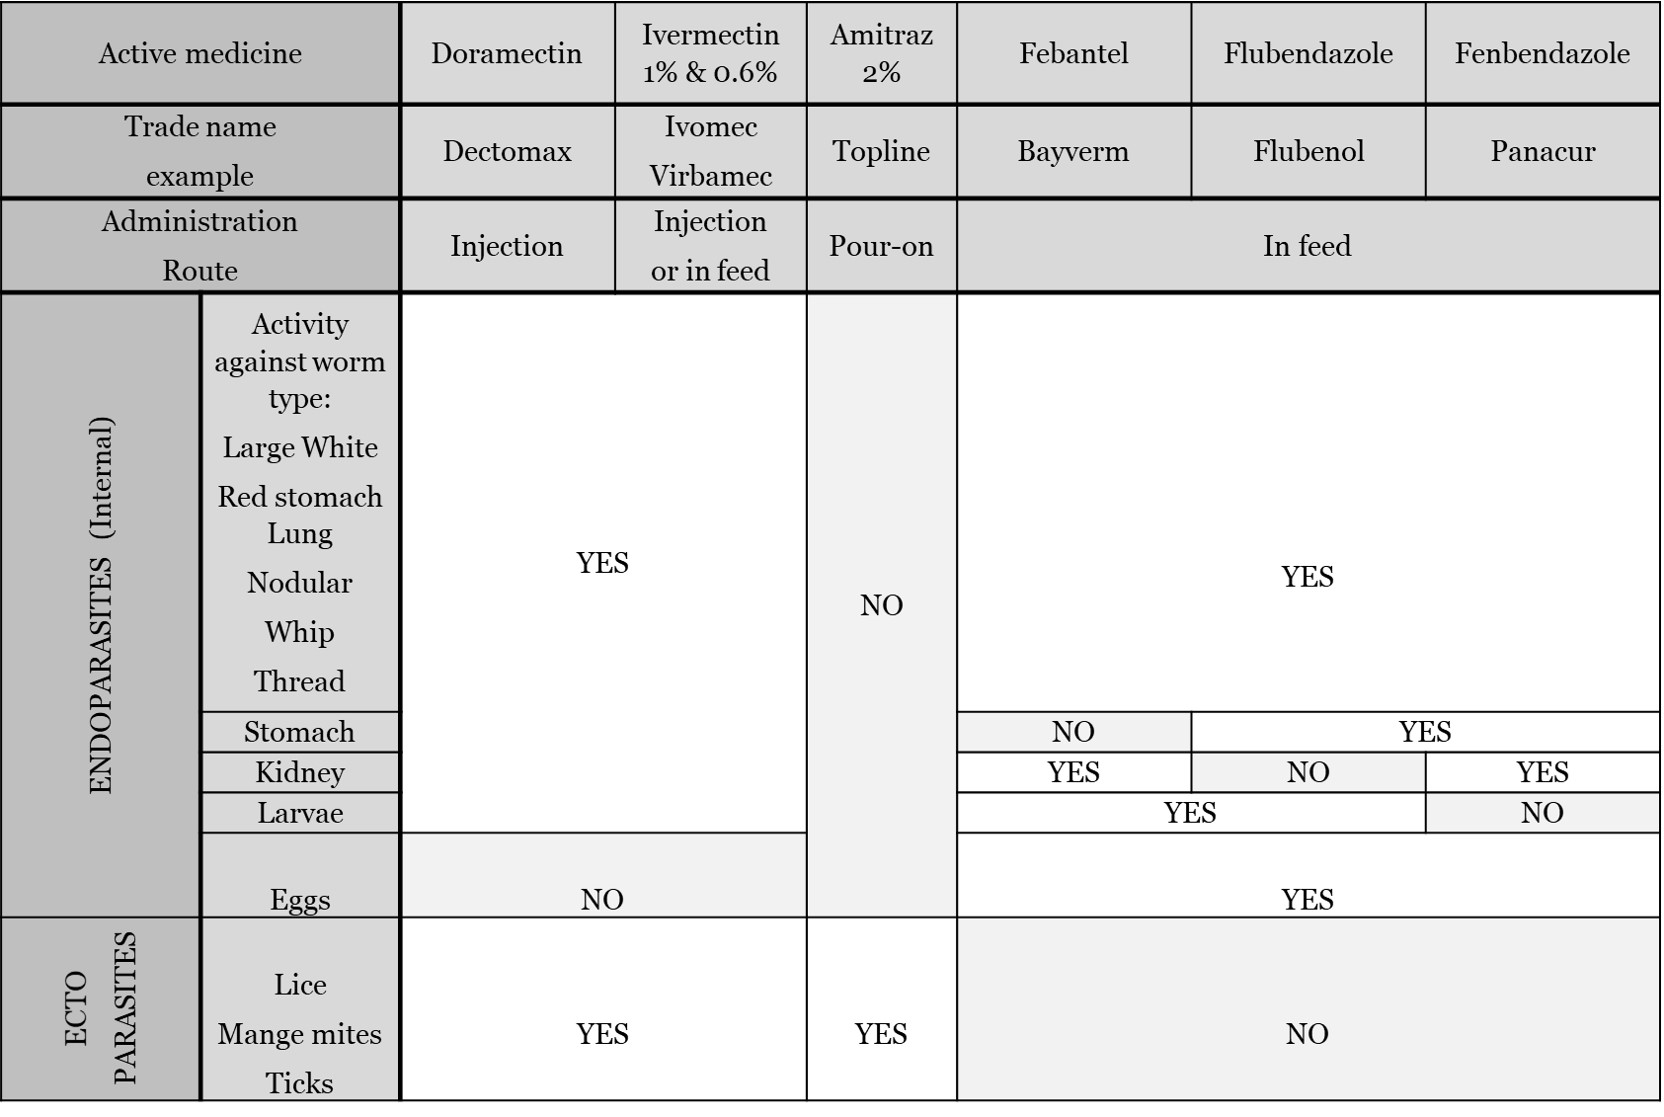 Table showing the efficacy of de-wormers against different parasites